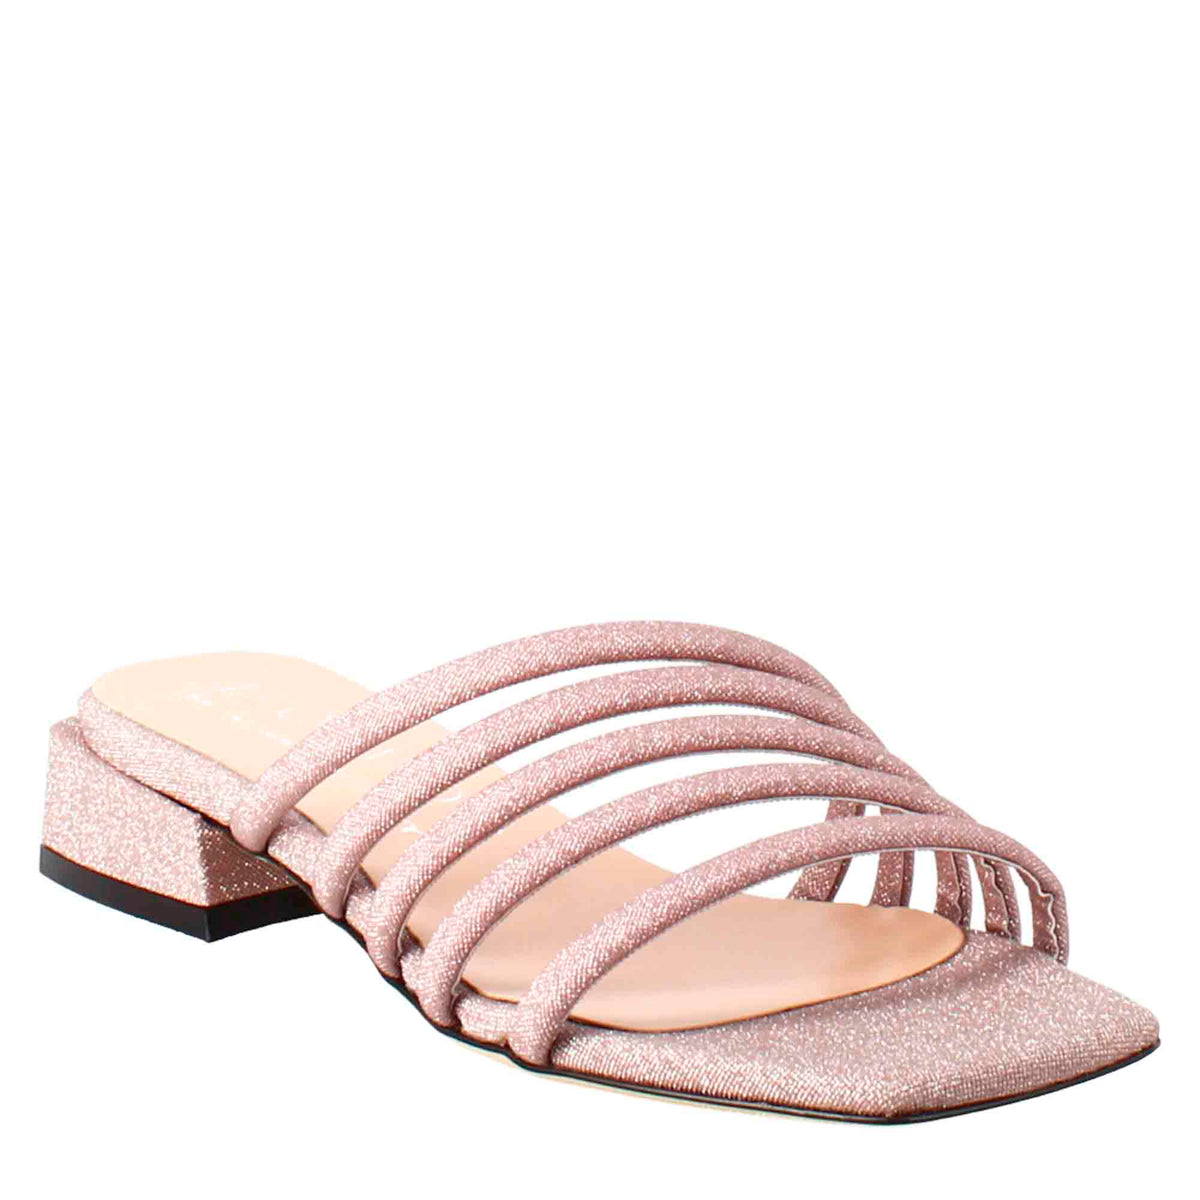 SEE BY CHLOÉ, Ivory Women's Sandals